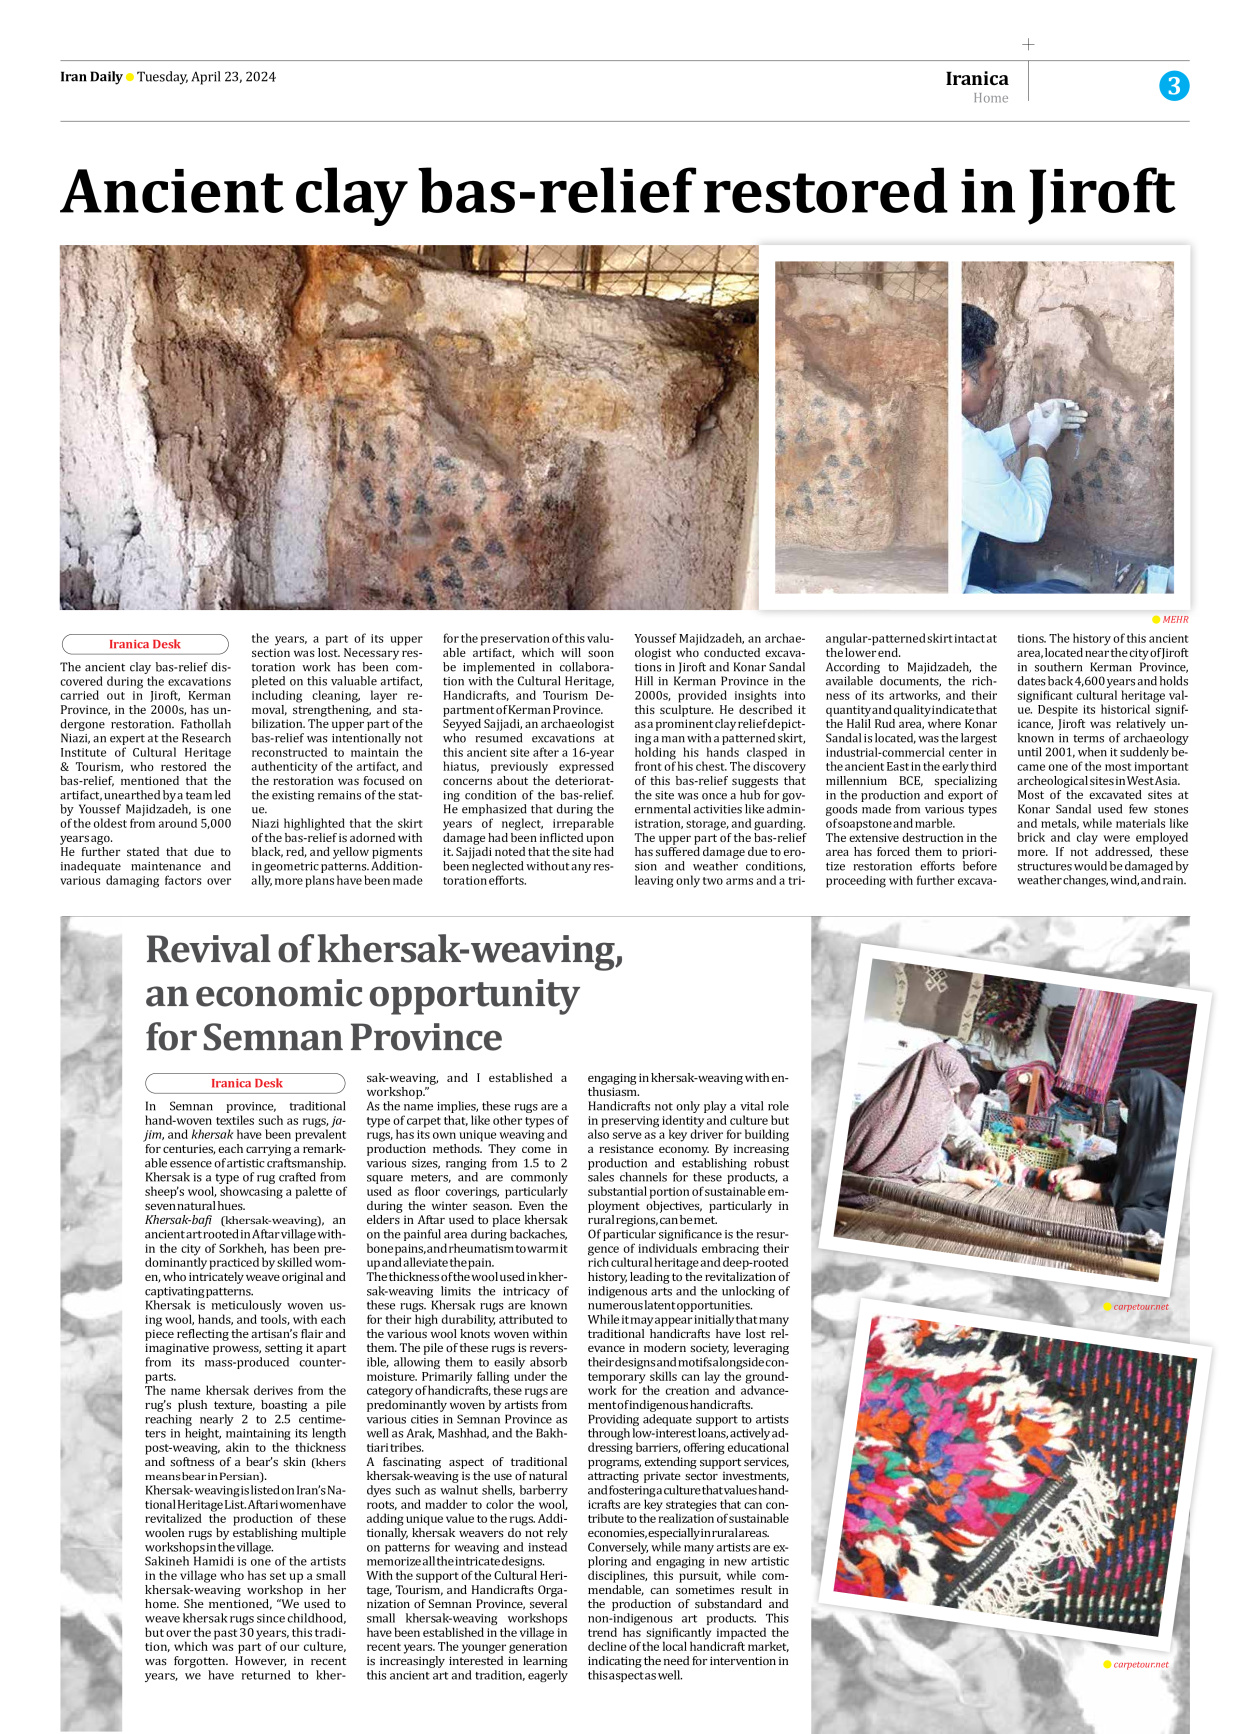 Iran Daily - Number Seven Thousand Five Hundred and Forty - 23 April 2024 - Page 3